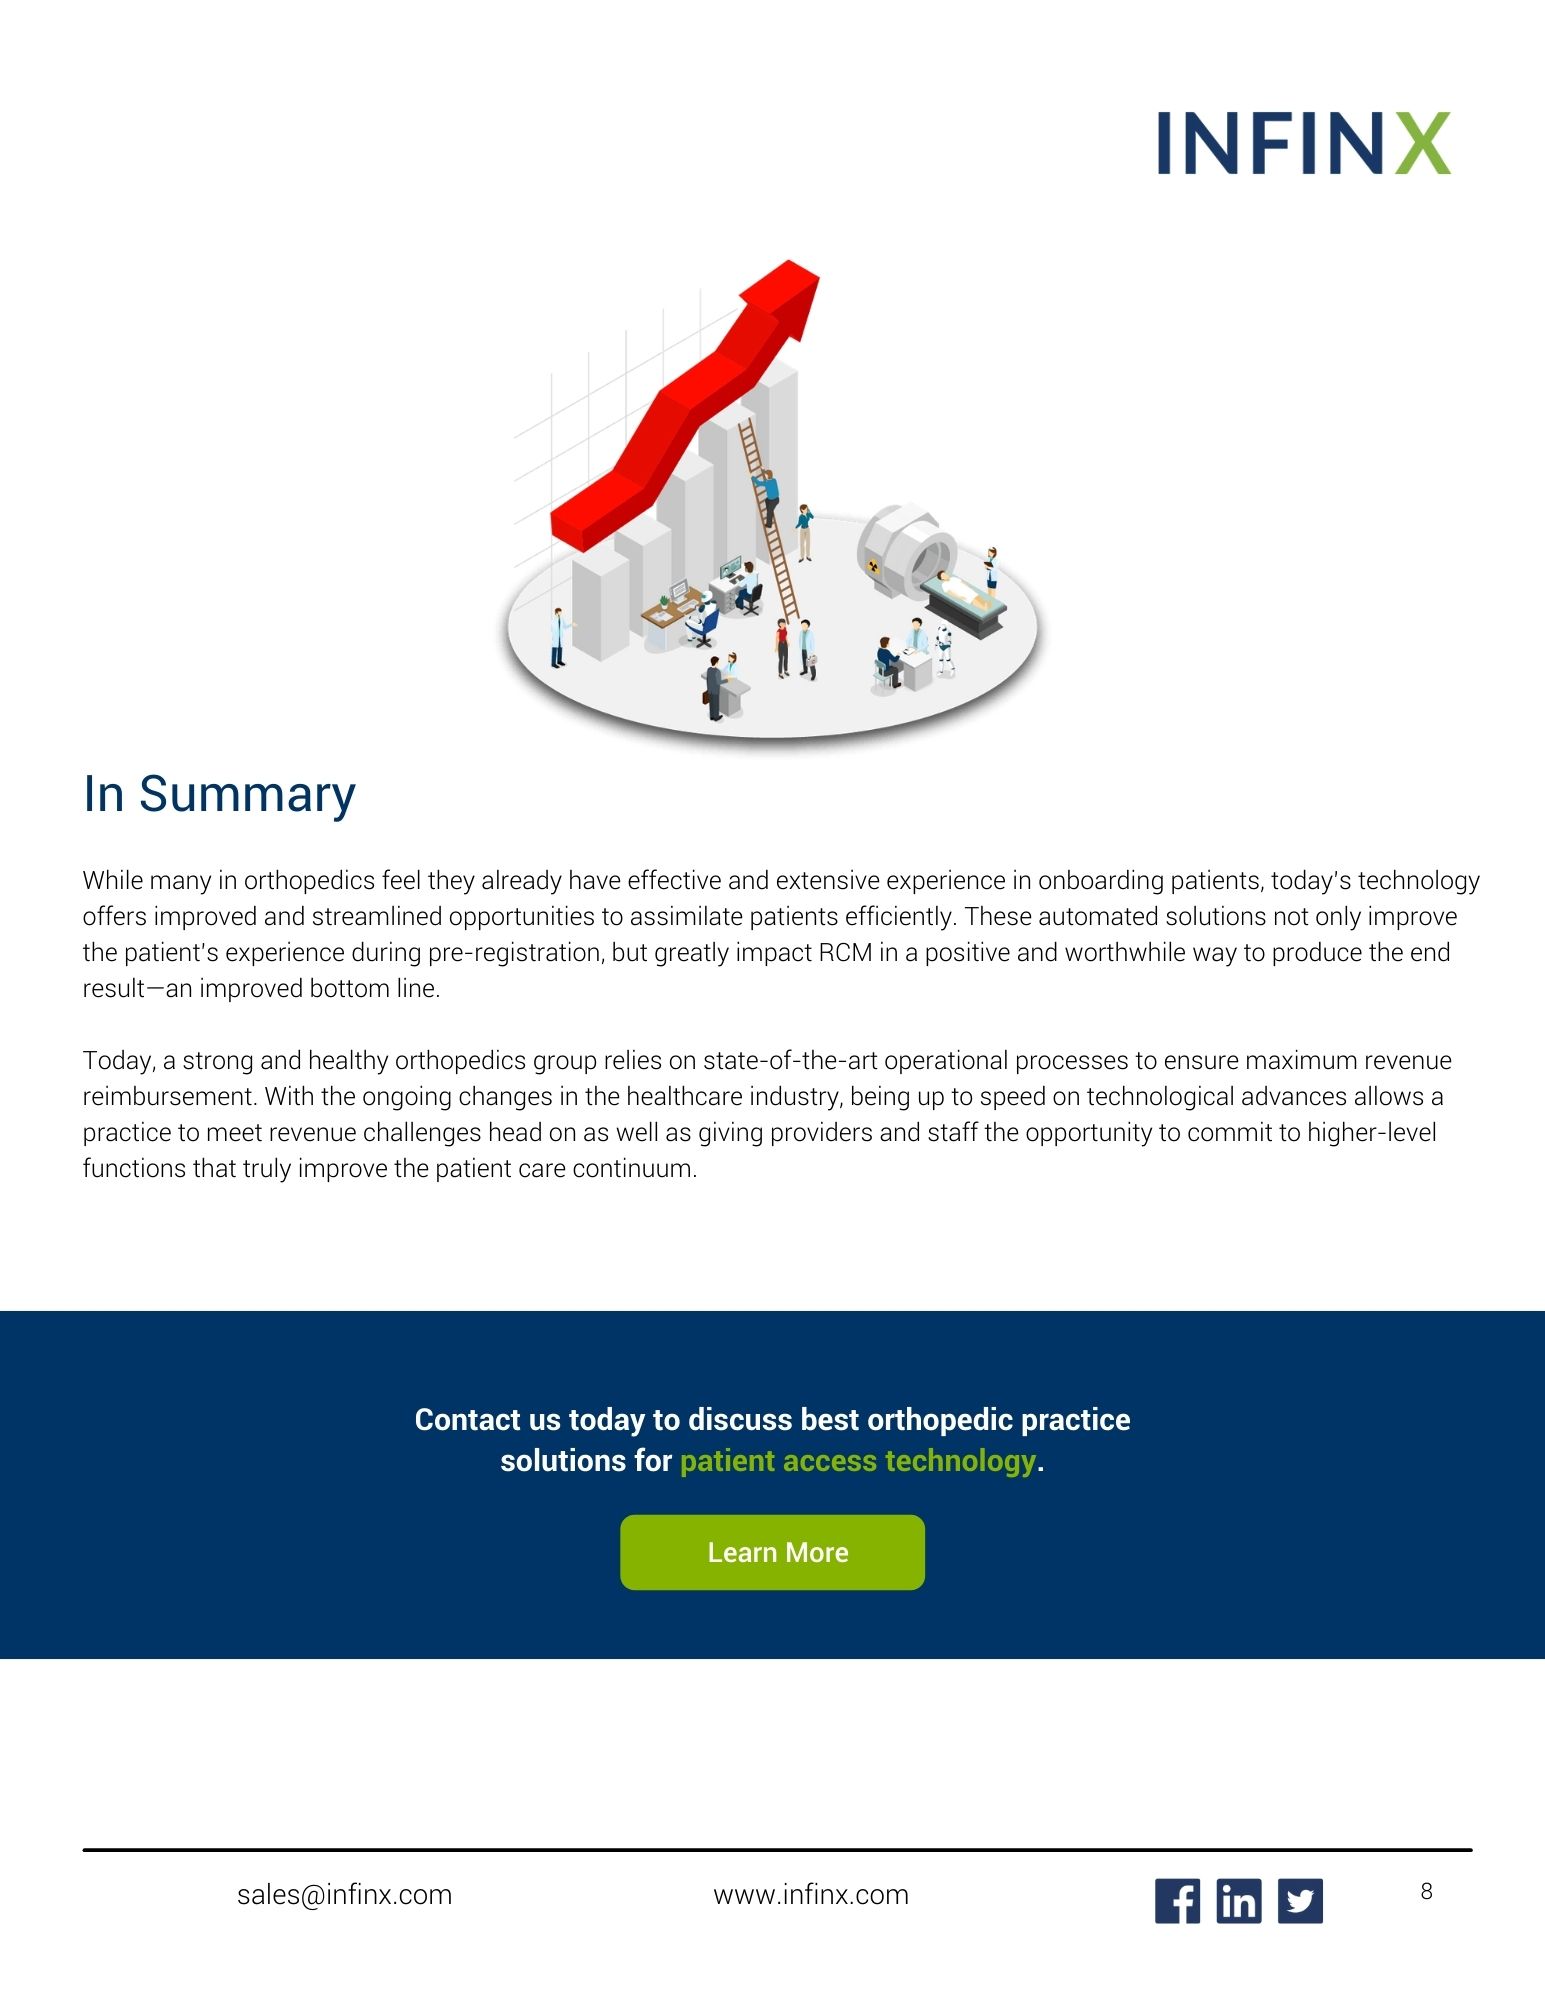 Infinx - White Paper - Automated Patient Access Solutions for Orthopedics - May 2021 8